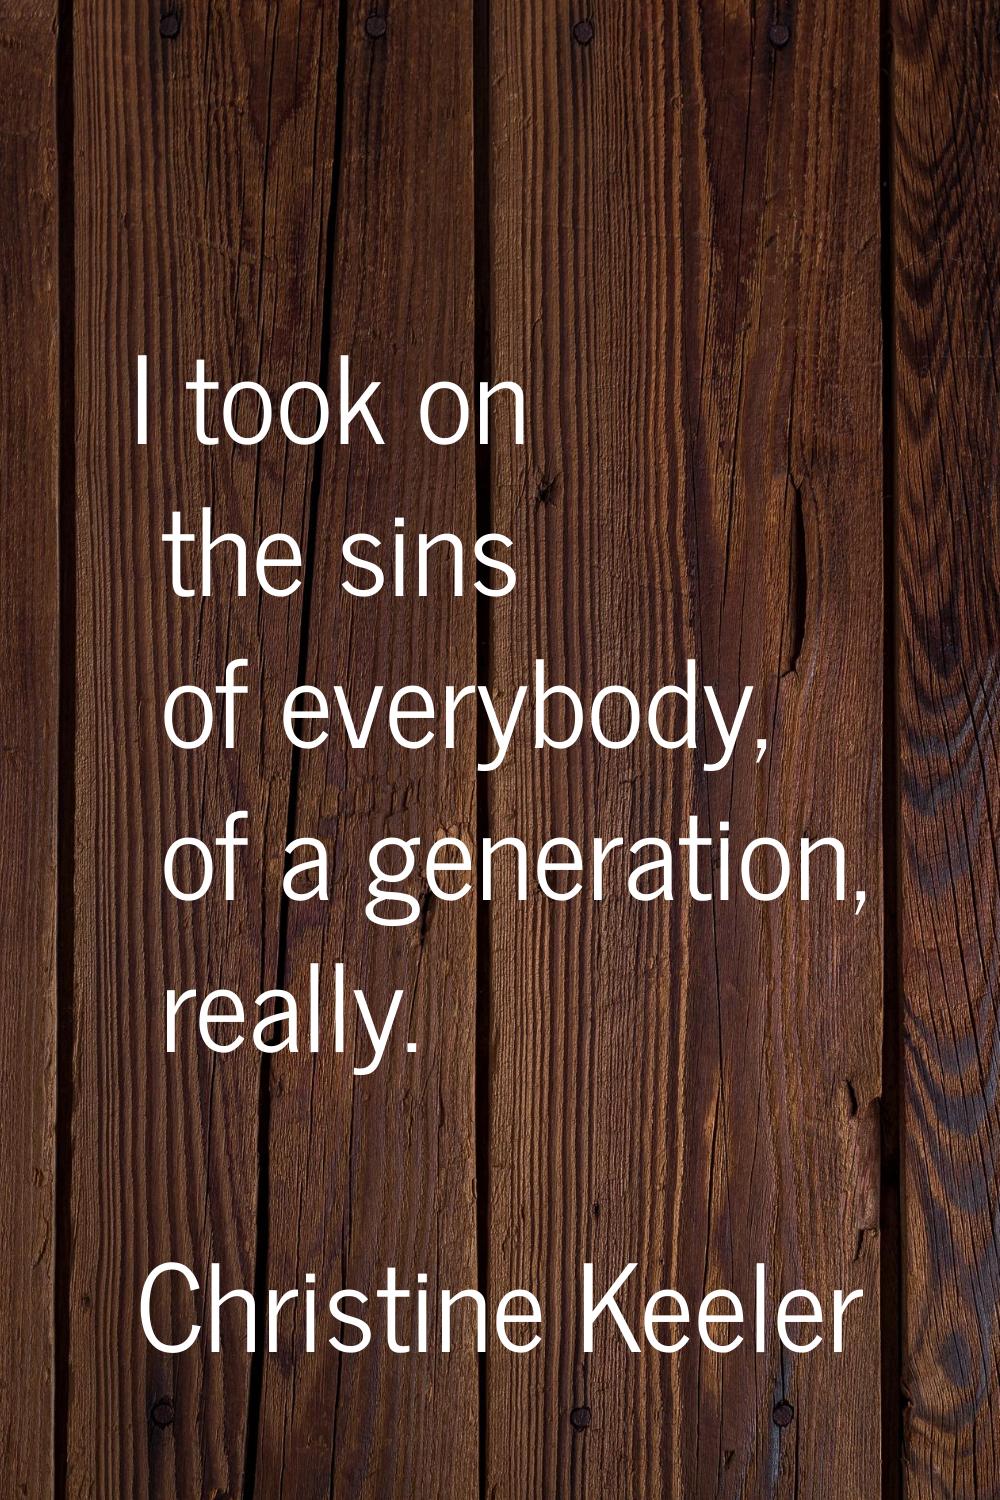 I took on the sins of everybody, of a generation, really.